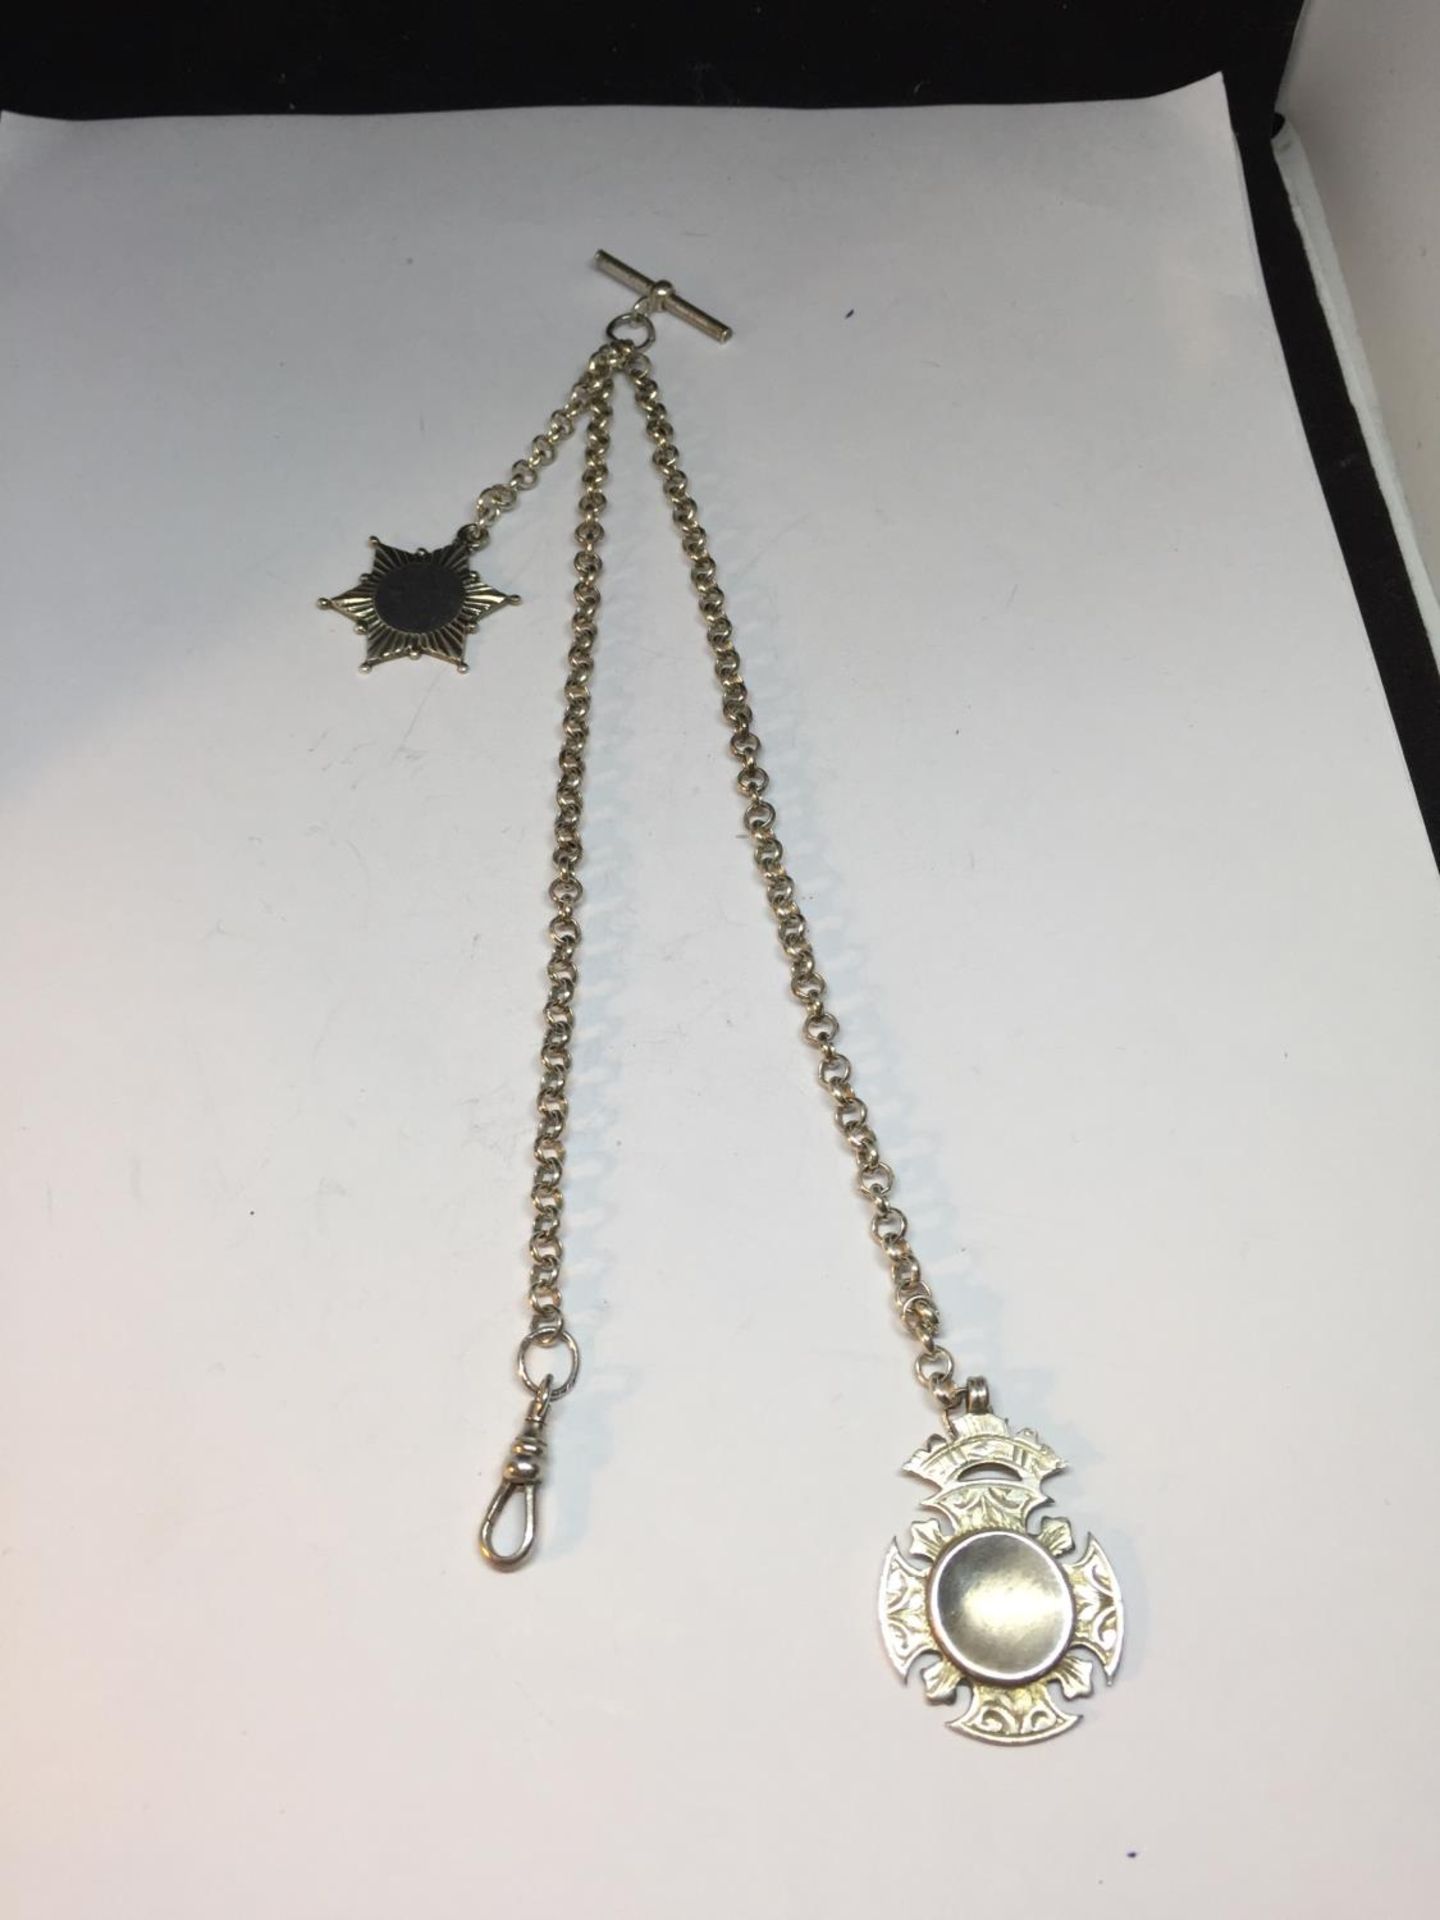 A SILVER DOUBLE ALBERT WATCH CHAIN WITH TWO FOBS